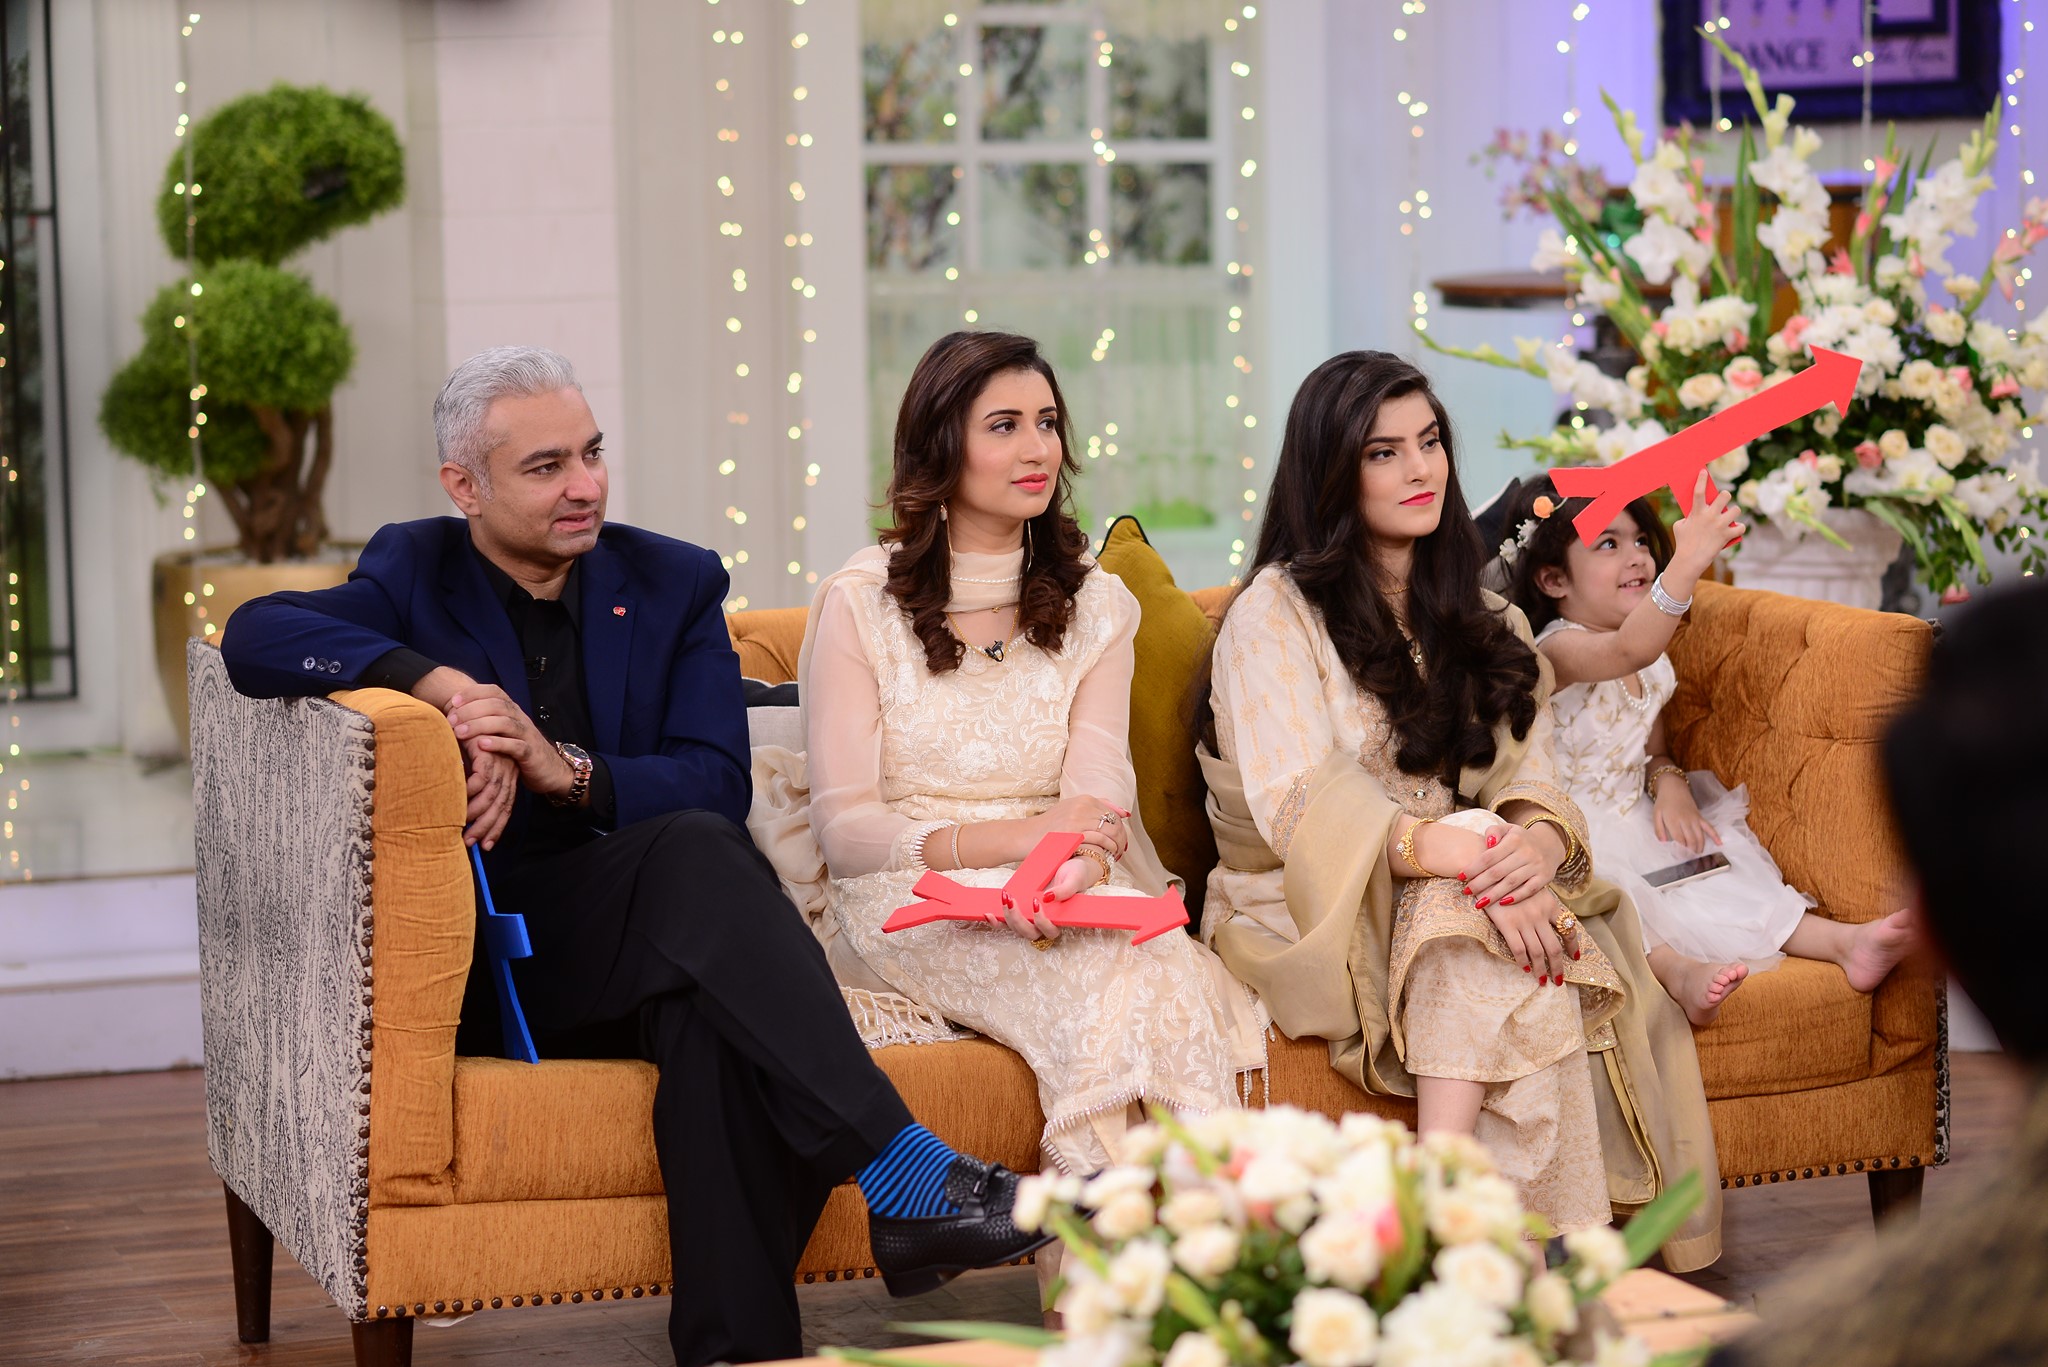 Iqrar Ul Hassan With His Whole Family in Good Morning Pakistan